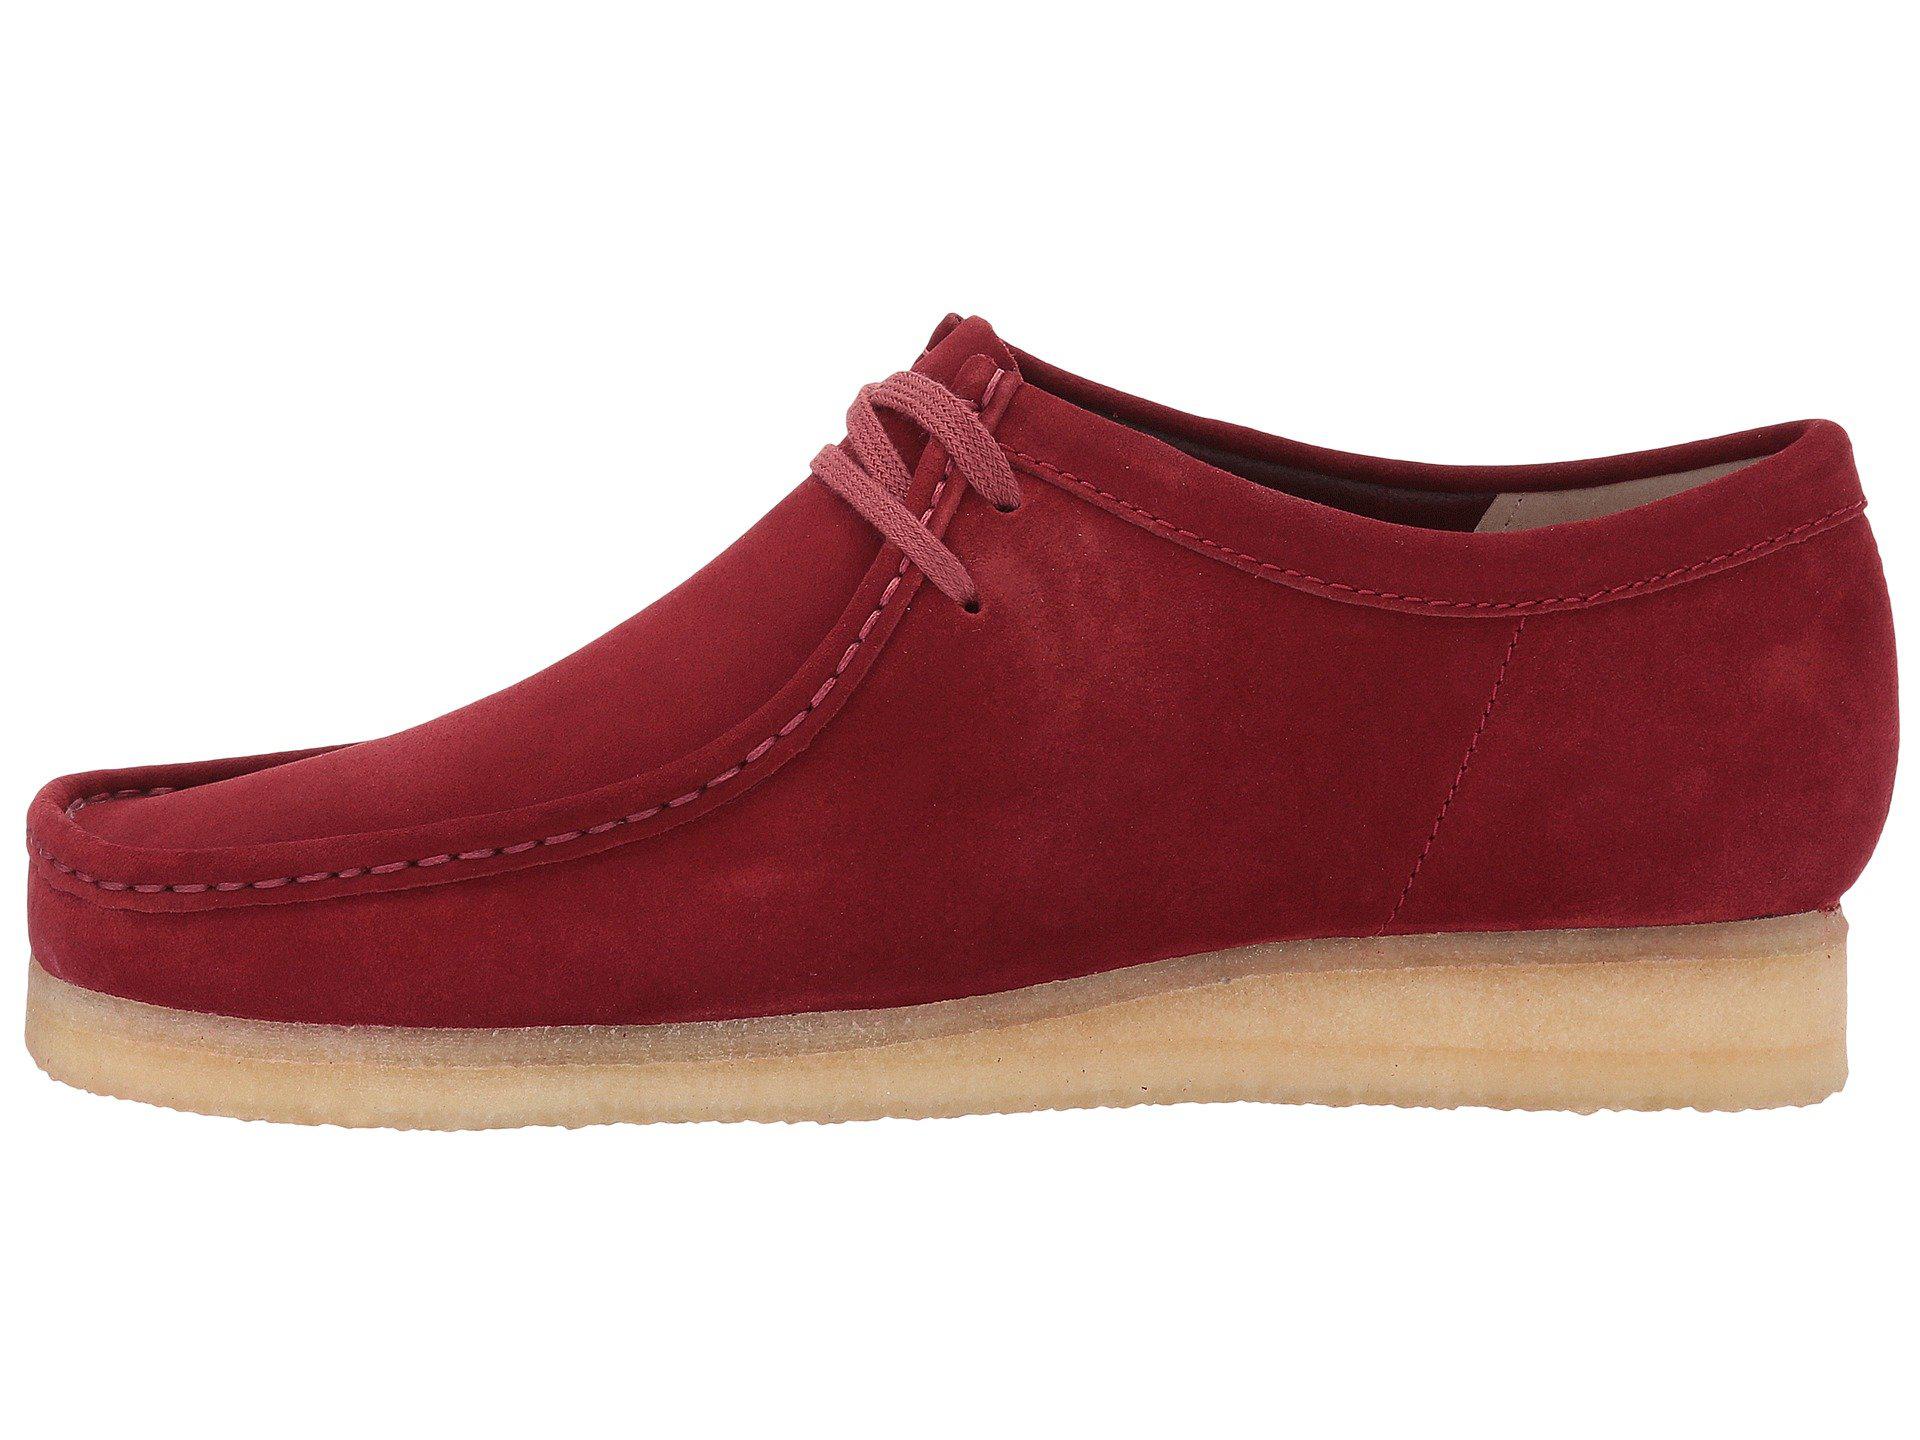 Clarks Leather Wallabee in Red Suede (Red) for Men - Lyst